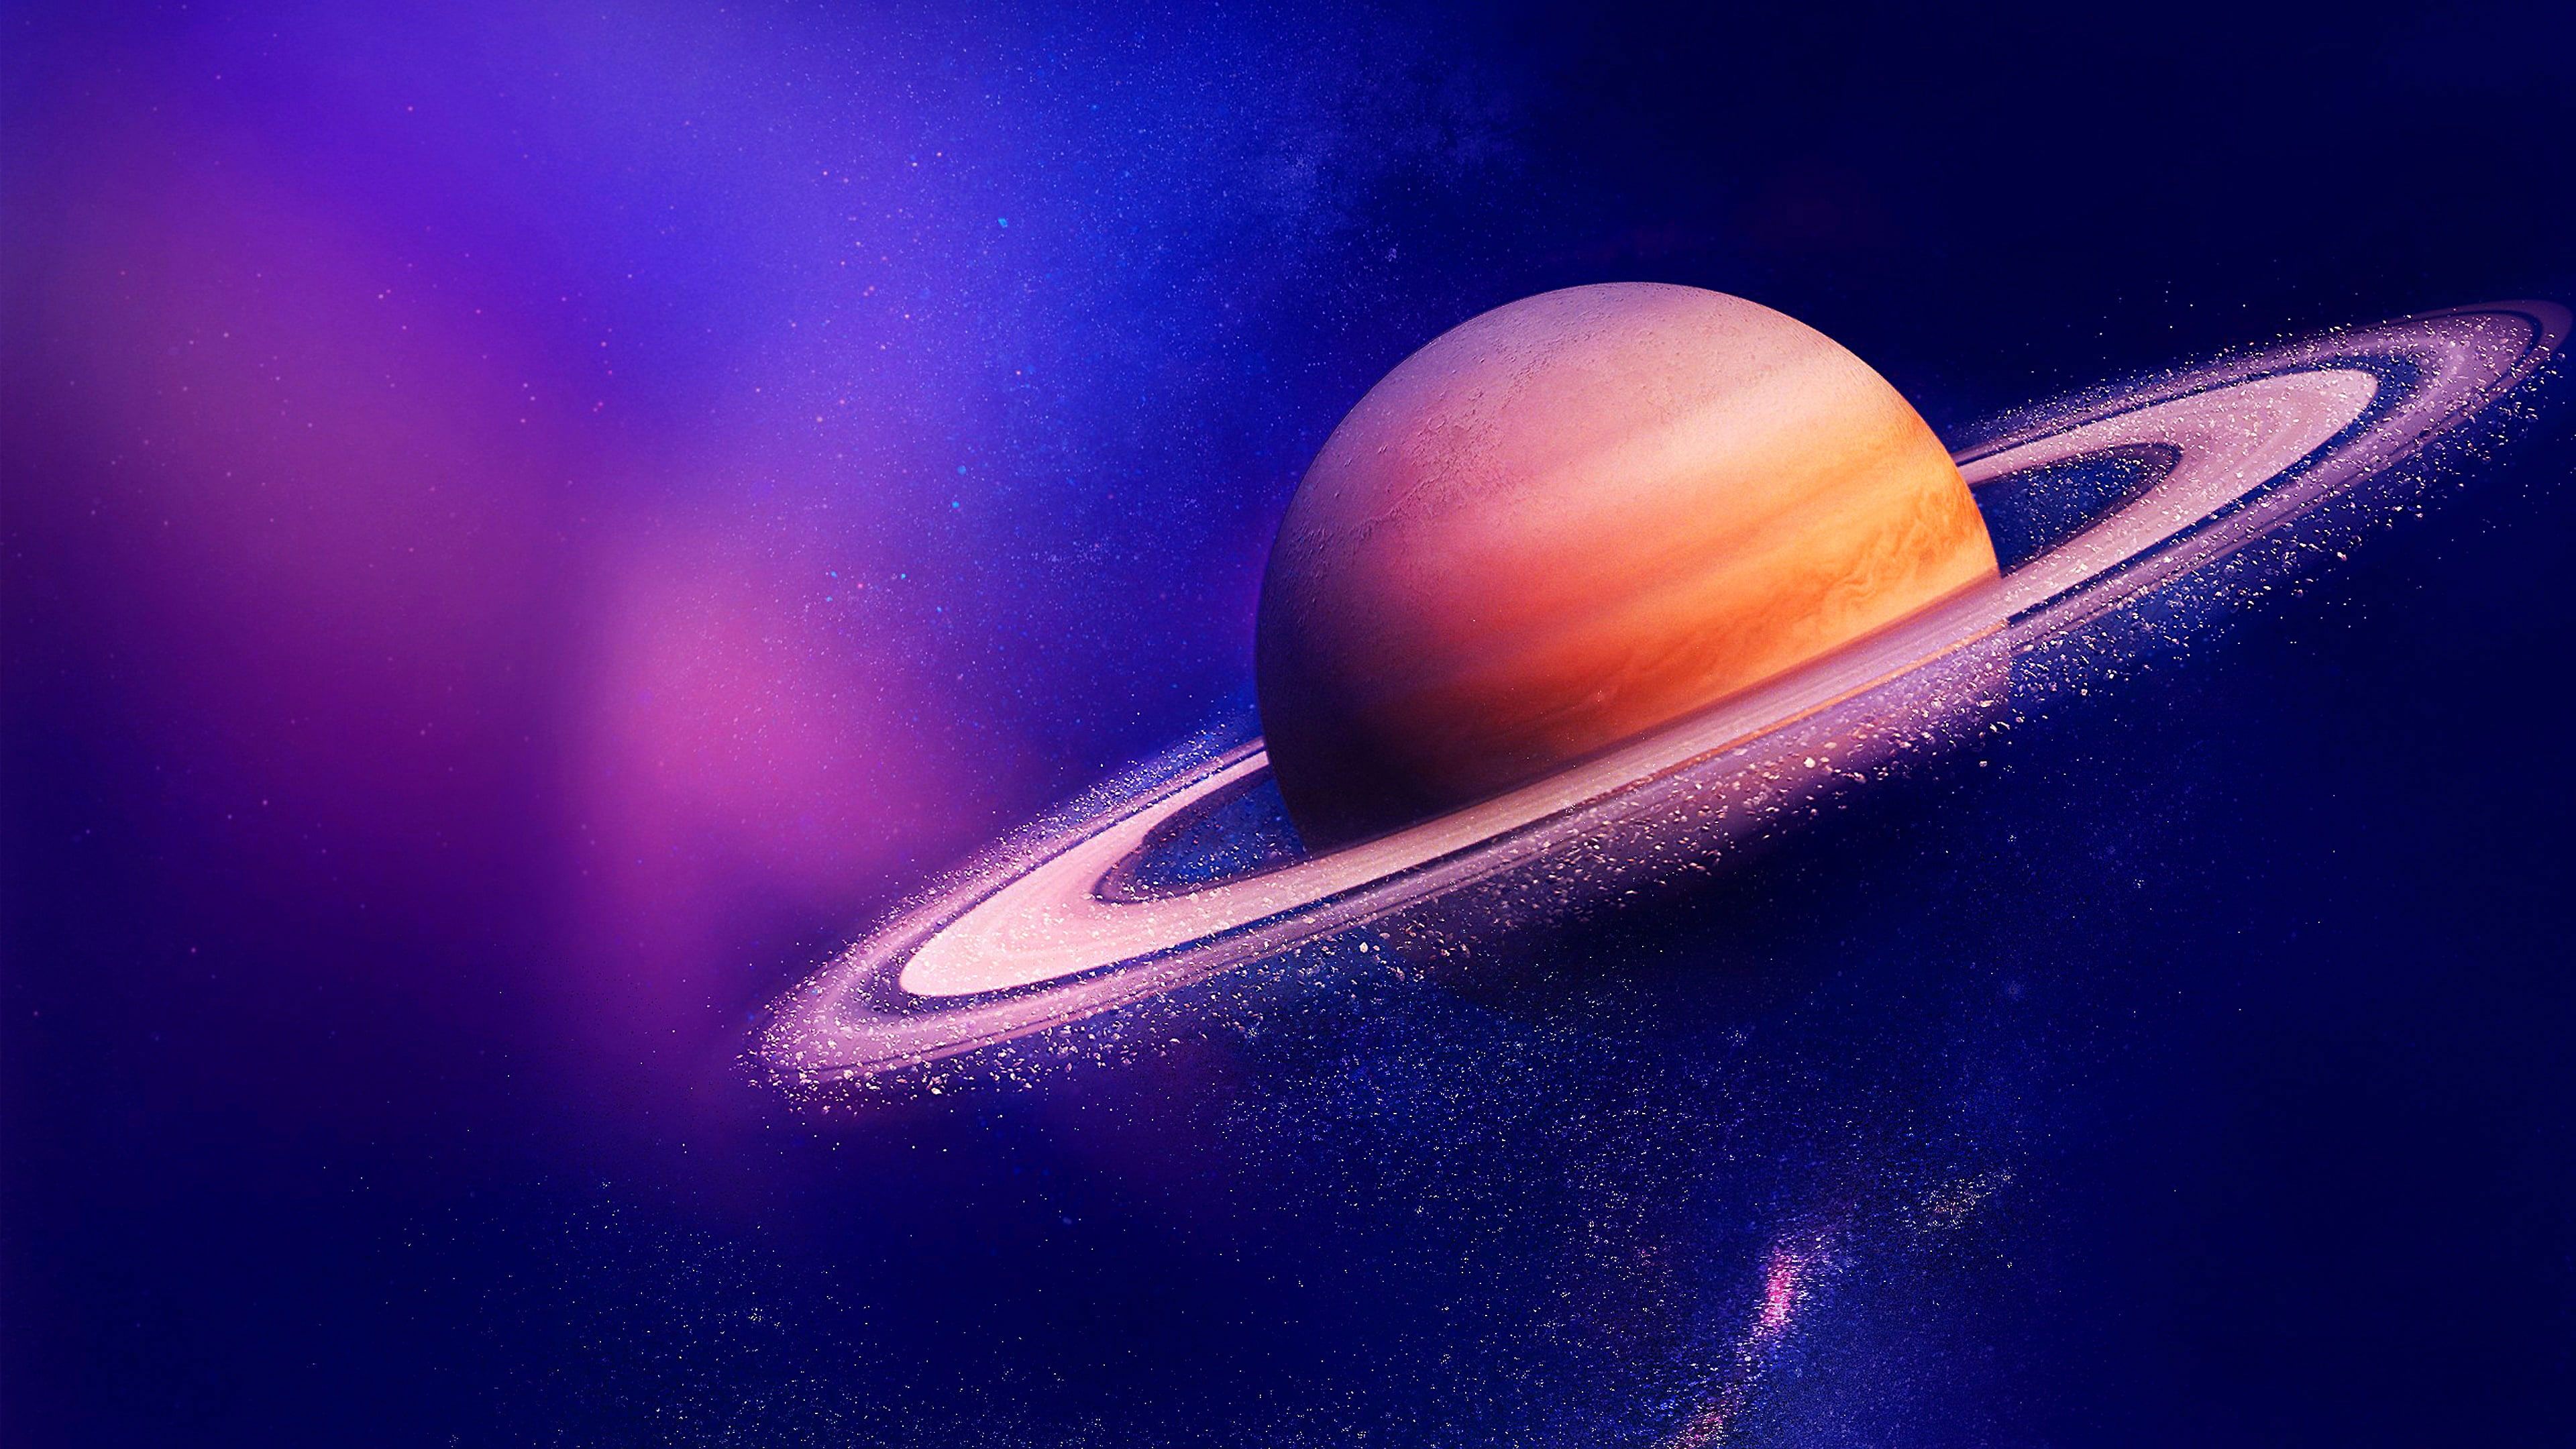 Saturn in space with a purple background - Saturn